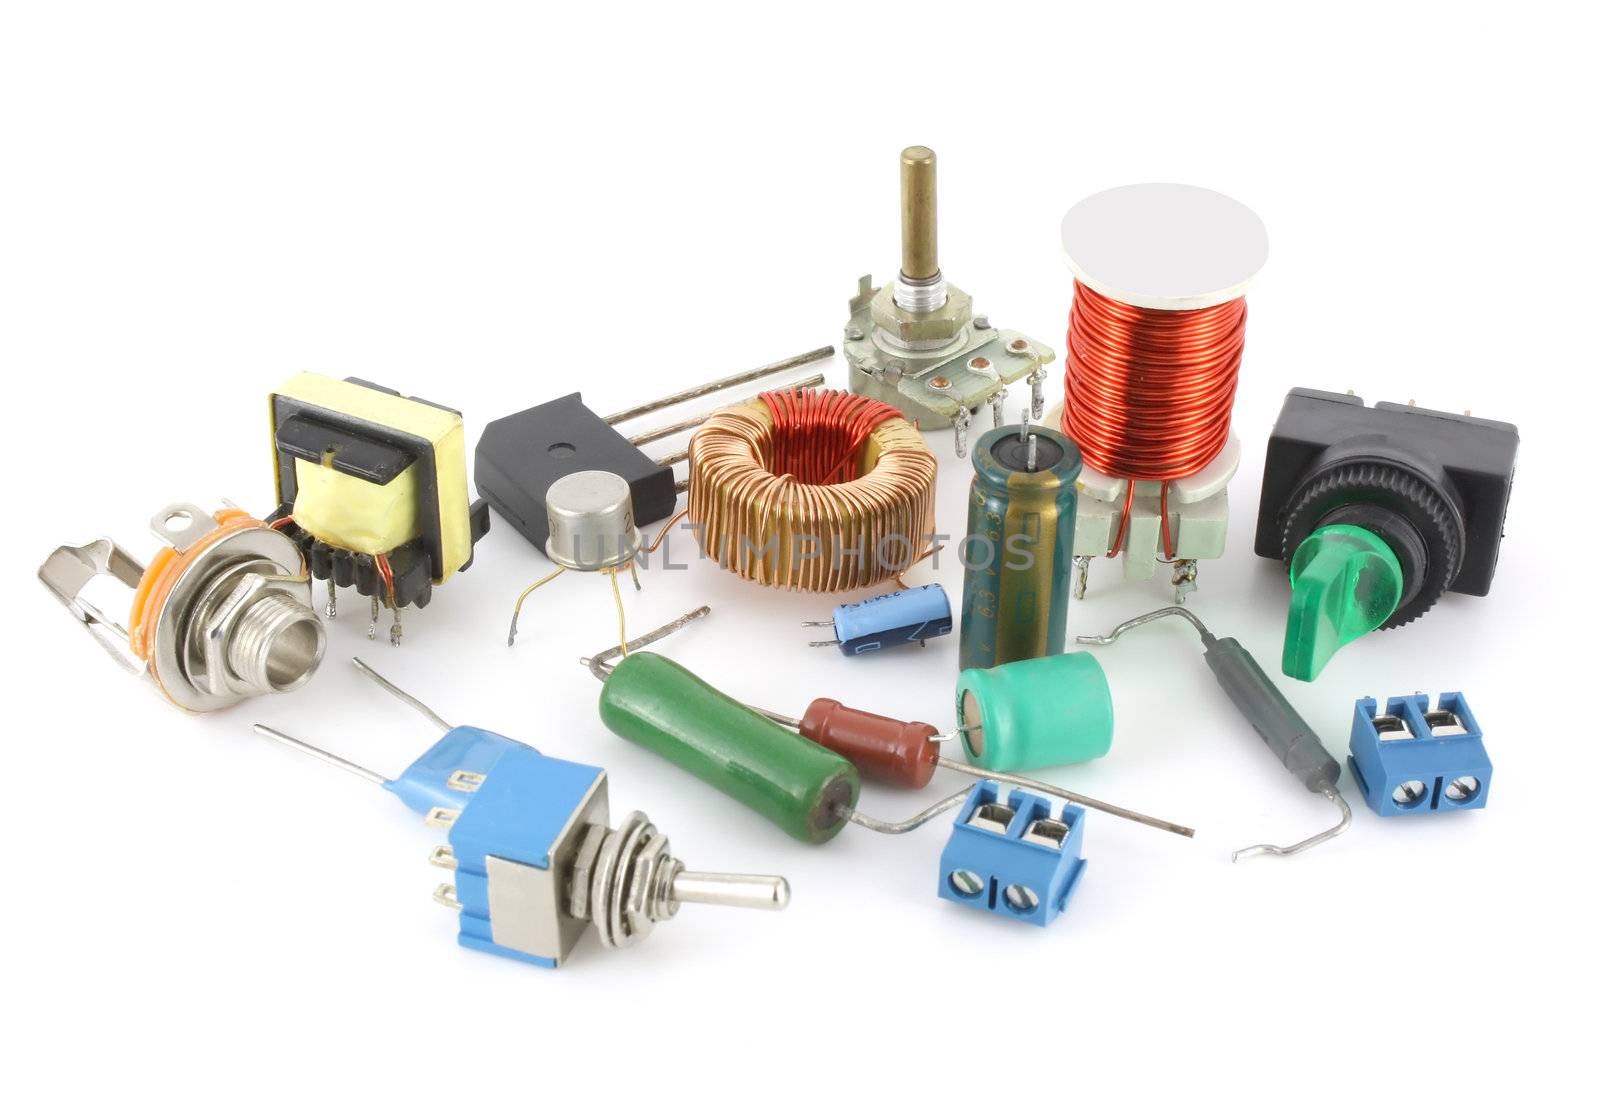 Electronic components by sergpet